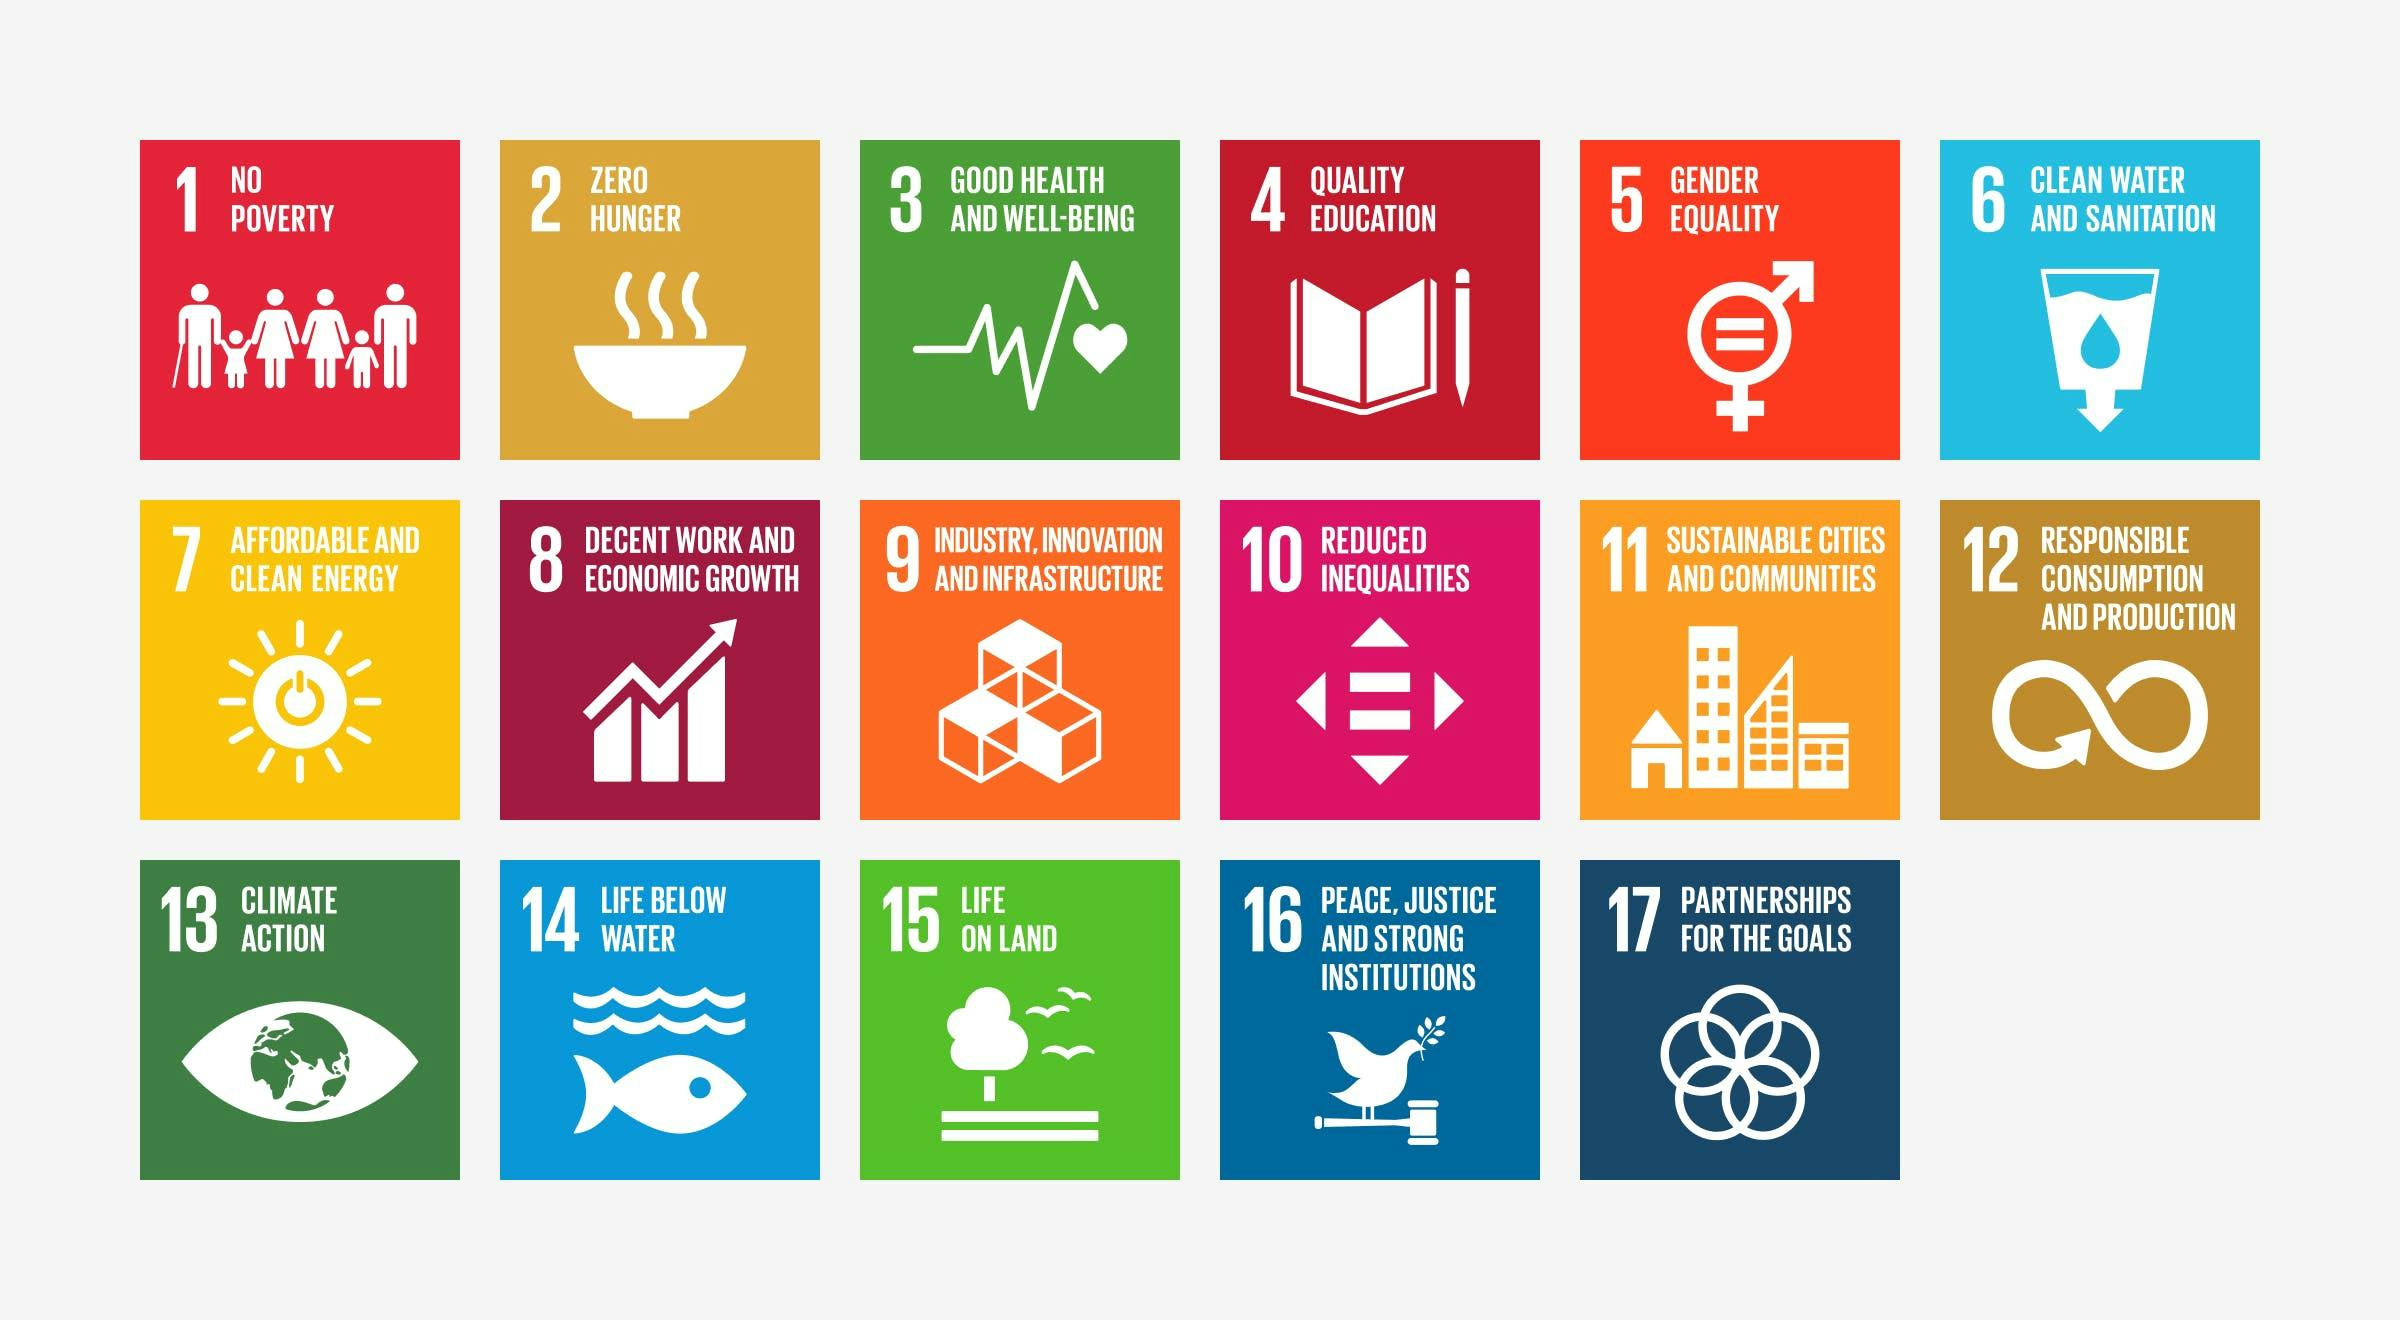 The icons of the 17 UN Sustainable Development Goals (SDGs)